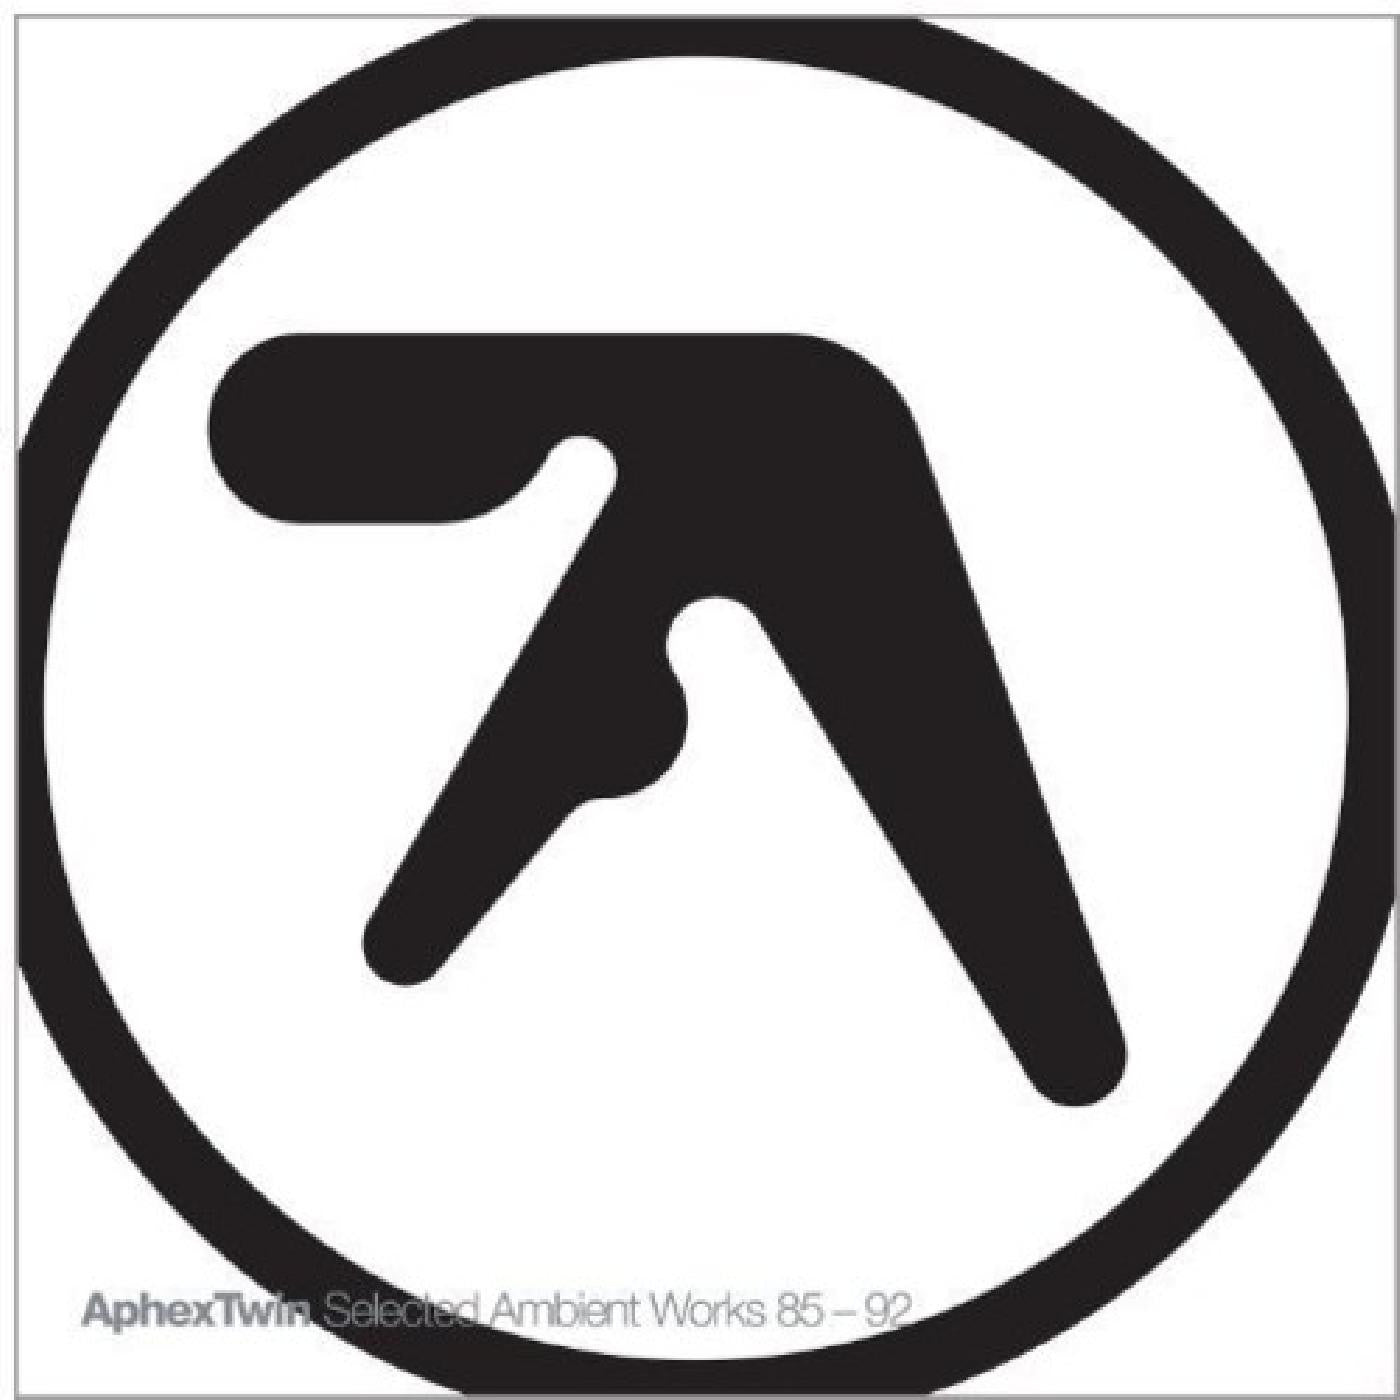 Aphex Twin ''Selected Ambient Works 85-92'' 2xLP